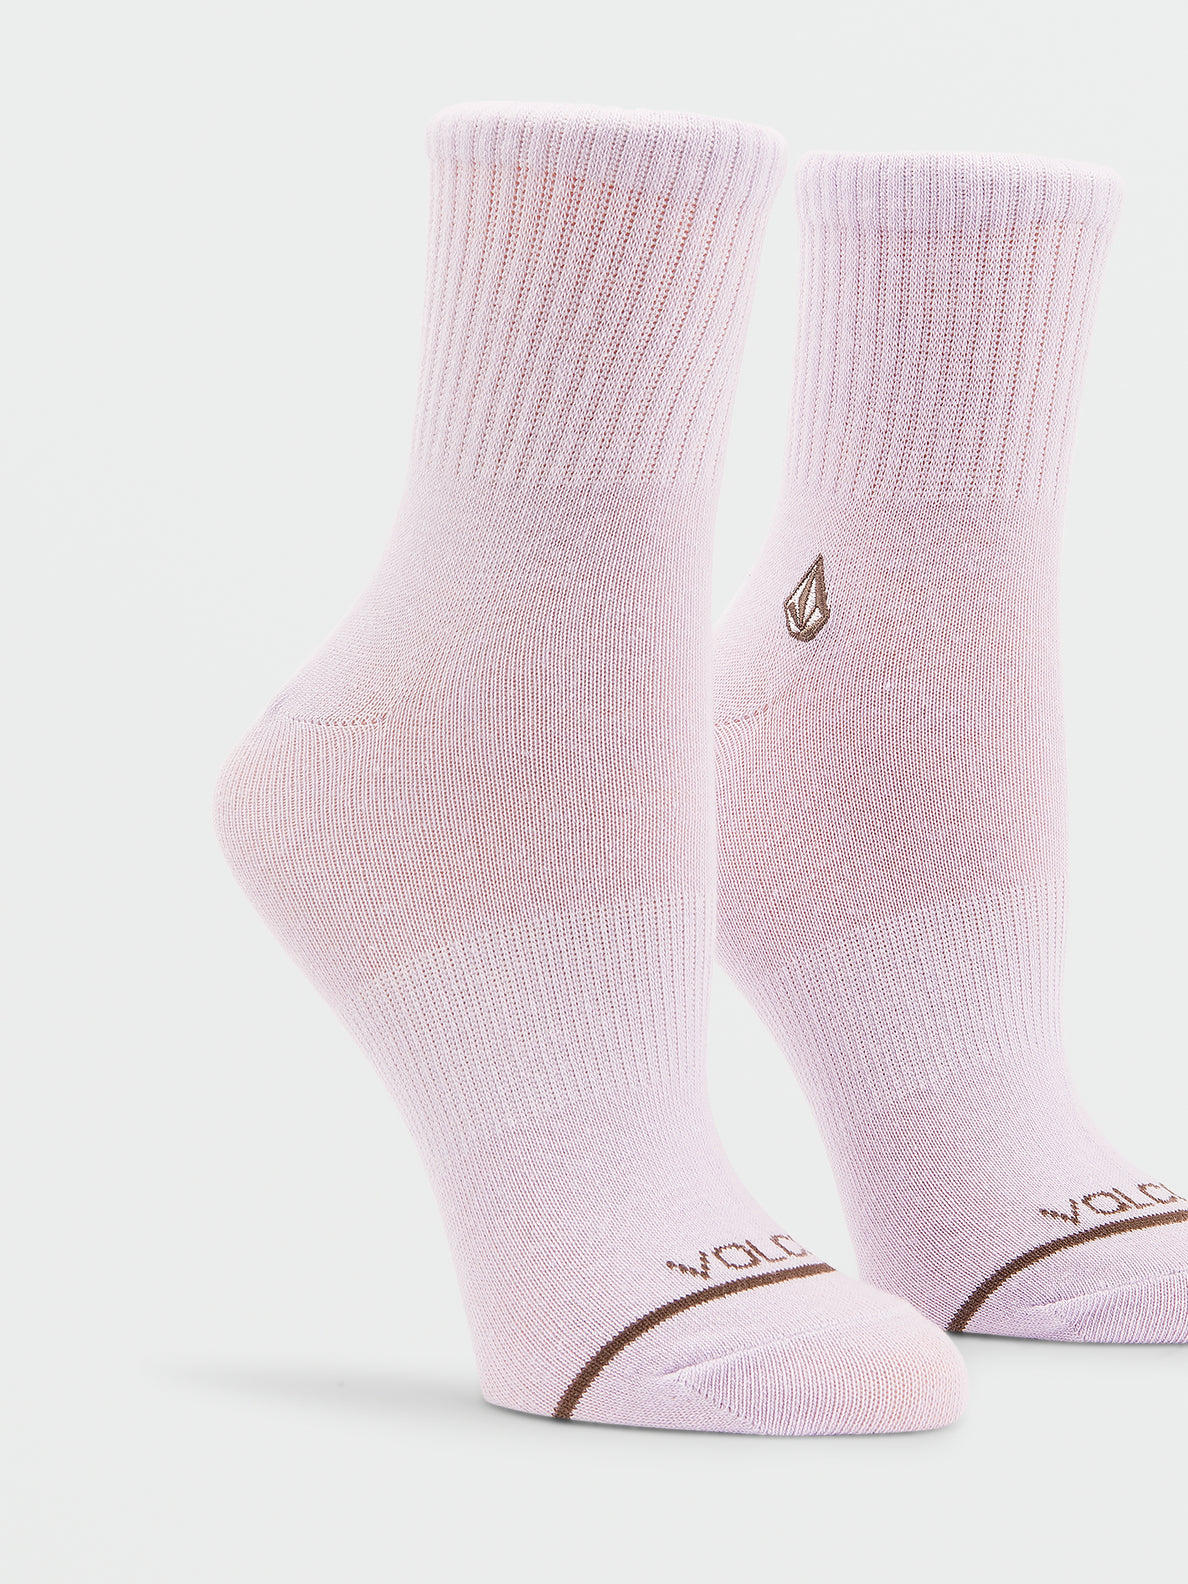 The New Crew Socks 3 Pack - Assorted Colors (E6332200_AST) [6]